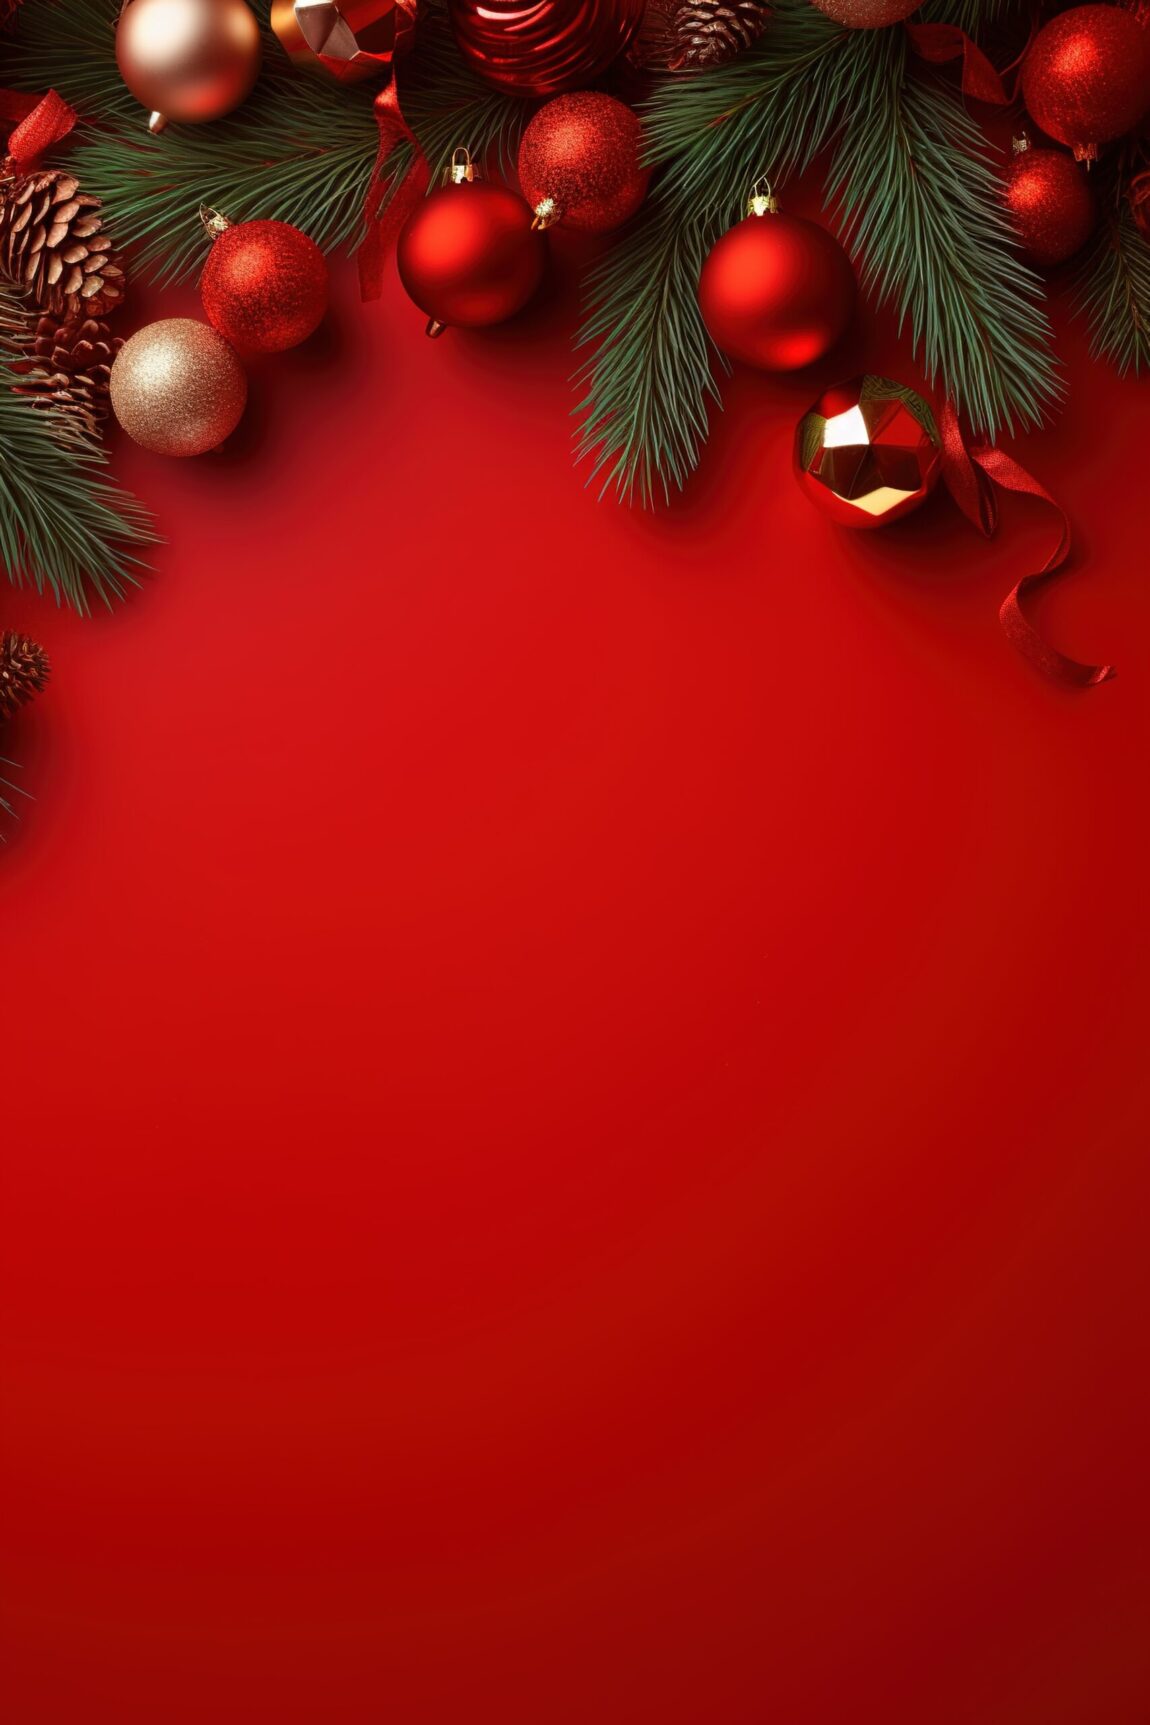 vertical-christmas-banner-with-blank-space-text-featuring-festive-decorations-scaled.jpg